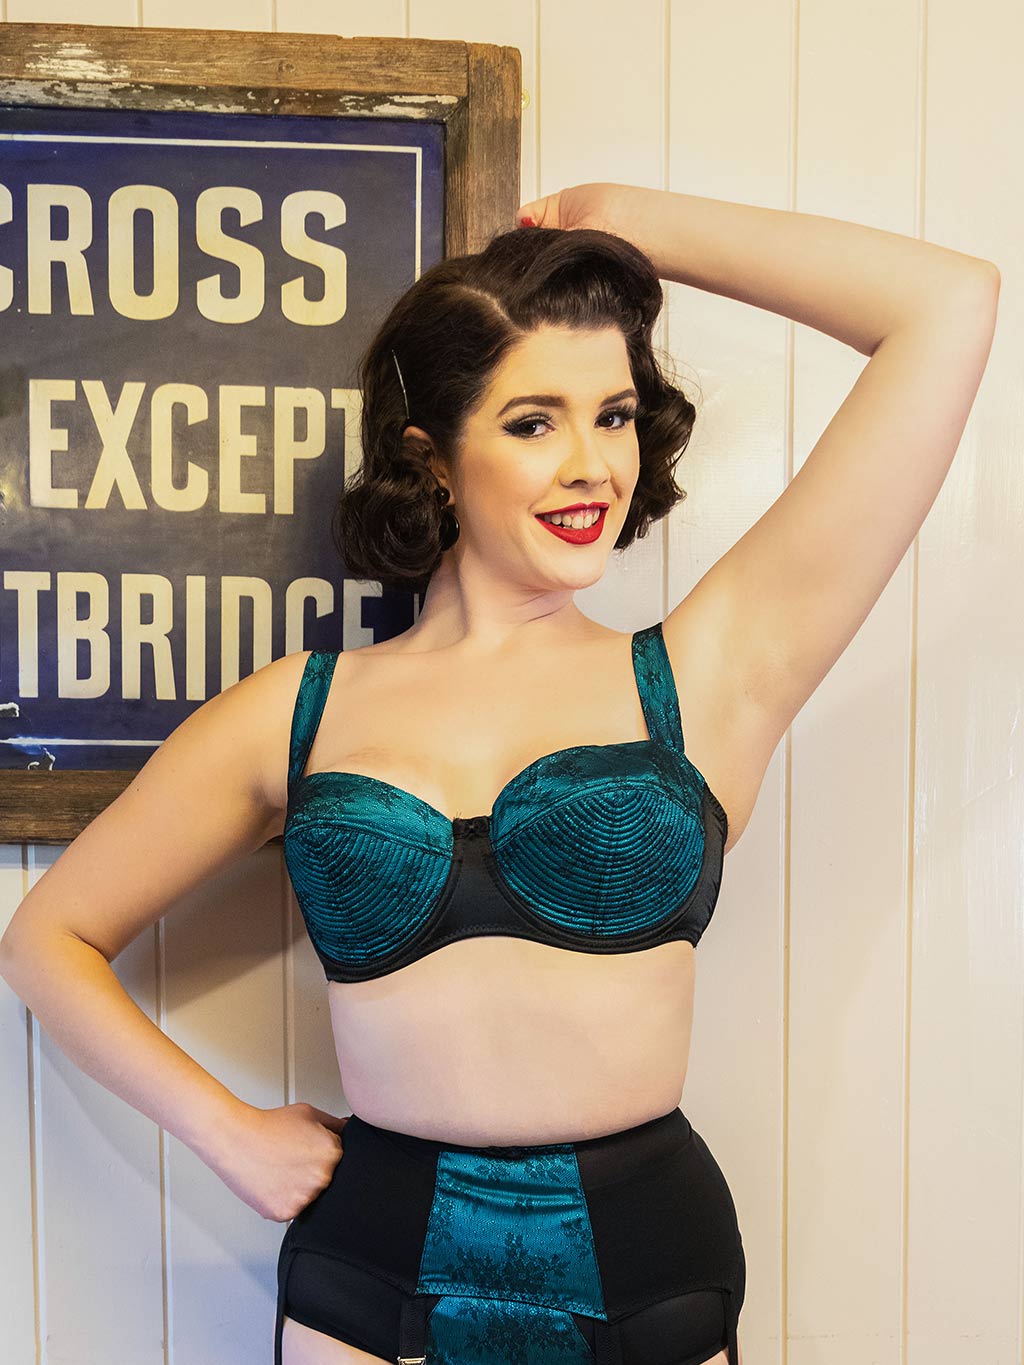 1950s inspired balconette bra in teal and black.  Intricate vintage stitching detail on cup.  Shop vintage inspired lingerie at What Katie Did